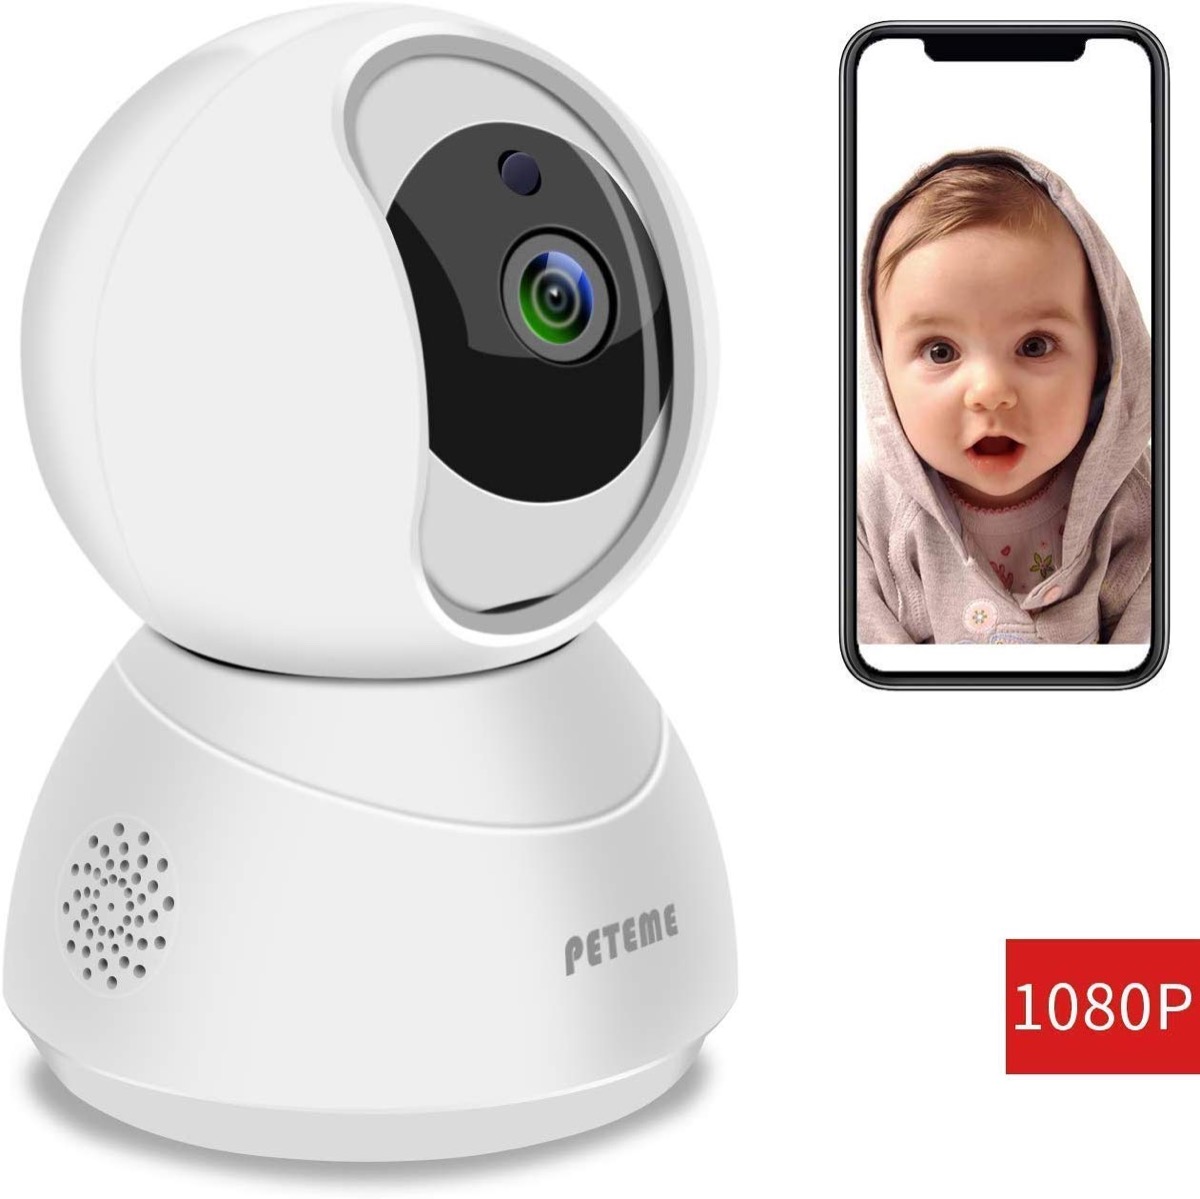 Baby monitor camera and cell phone with baby image